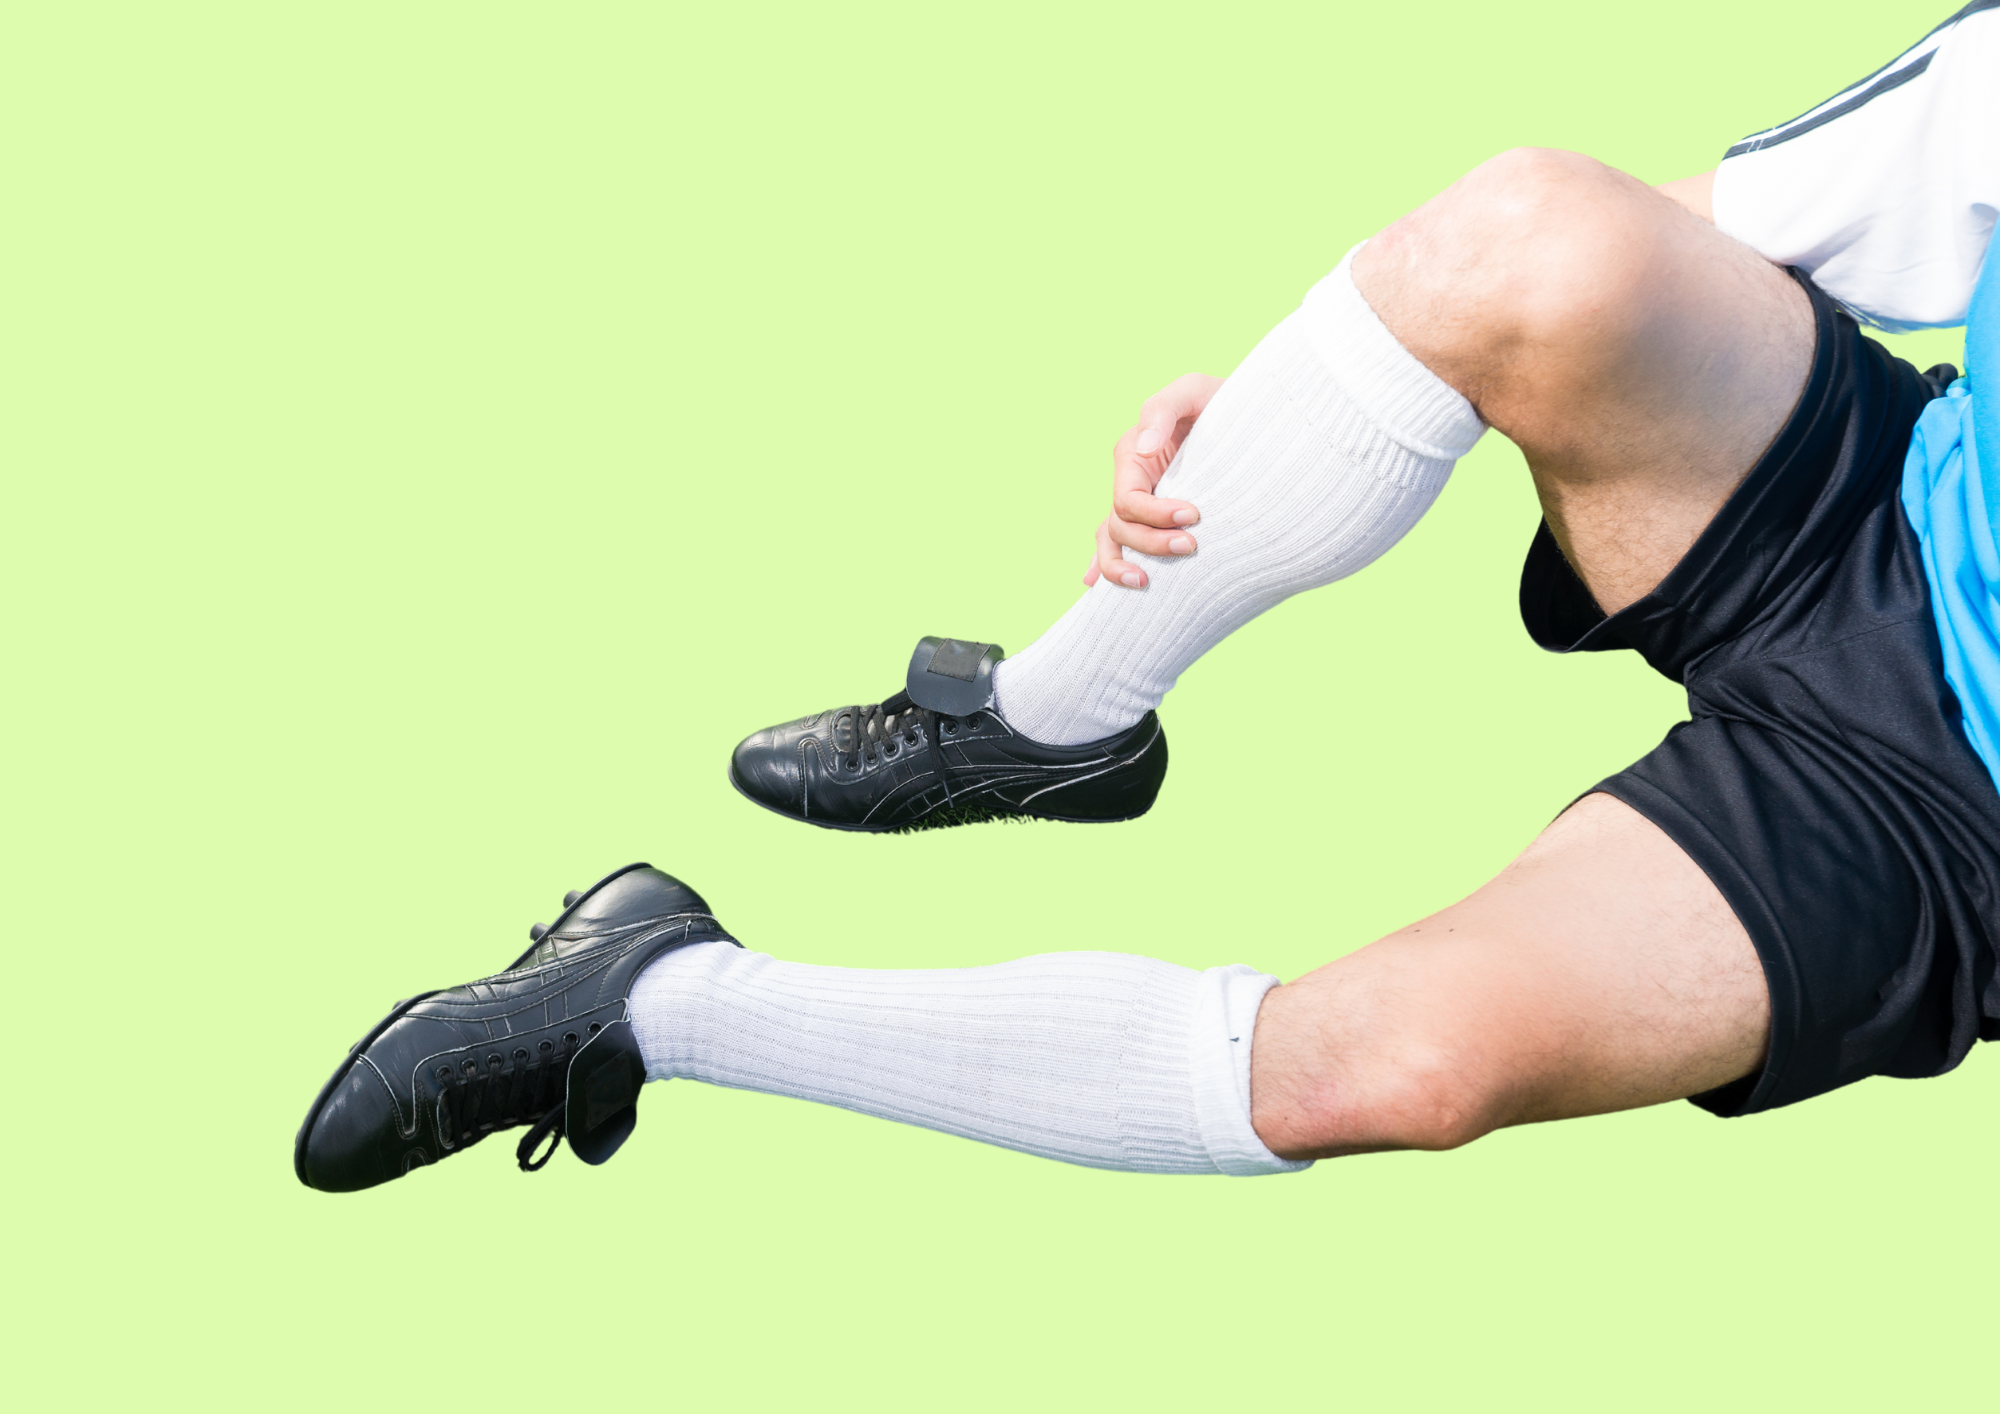 Soccer player is holding onto his shin in pain. Green background.